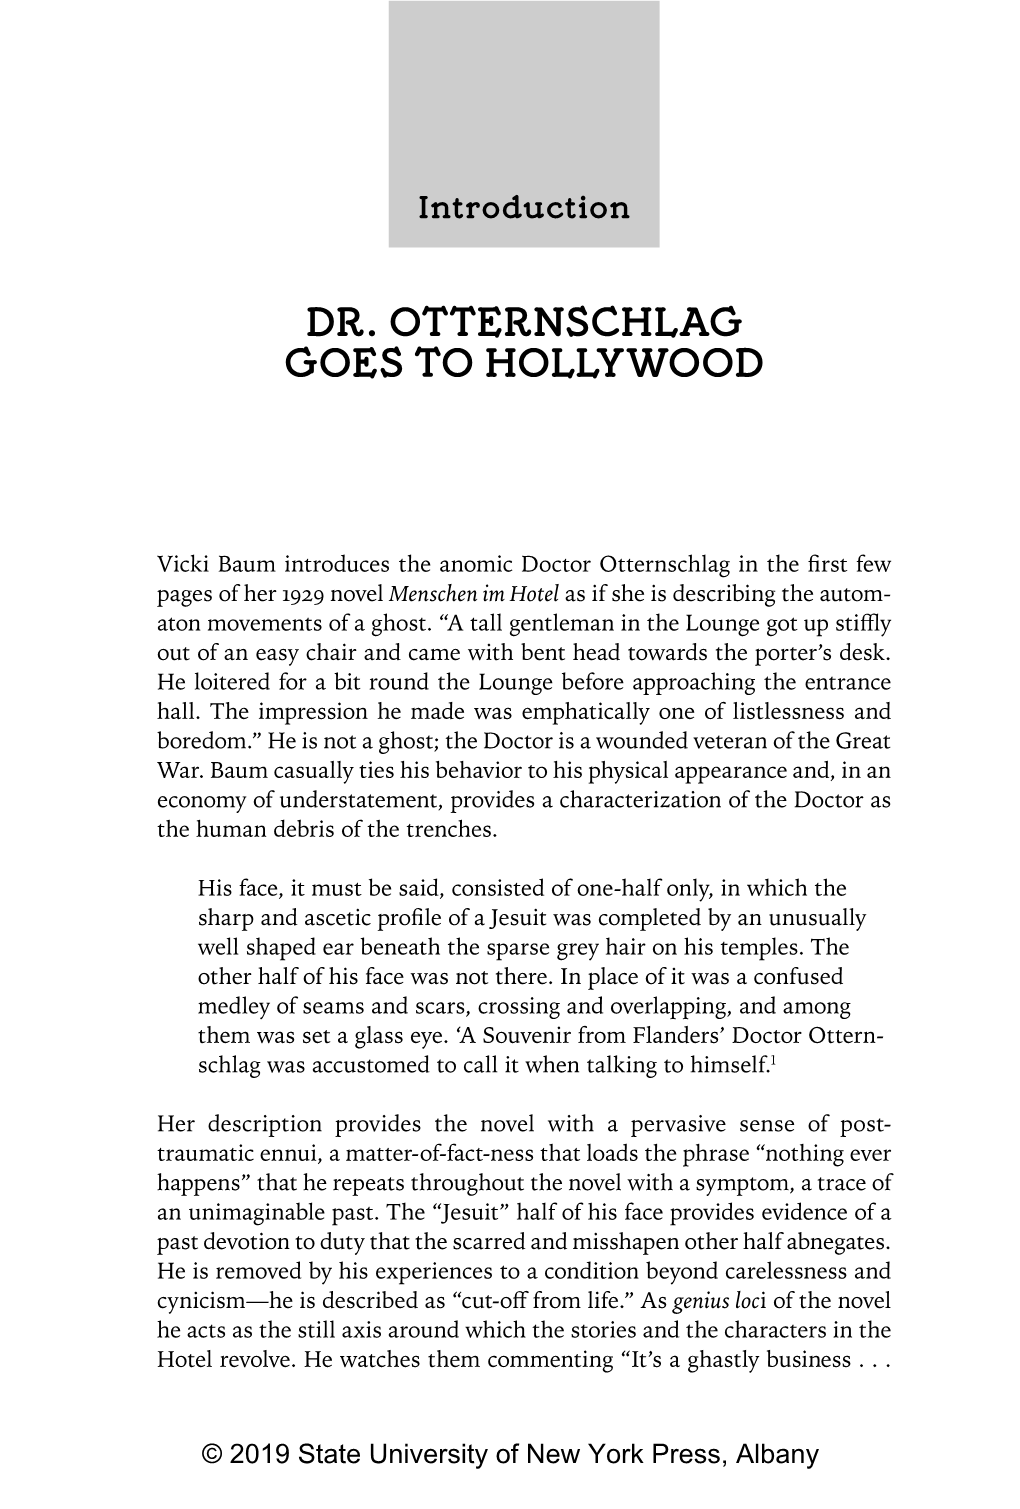 Dr. Otternschlag Goes to Hollywood